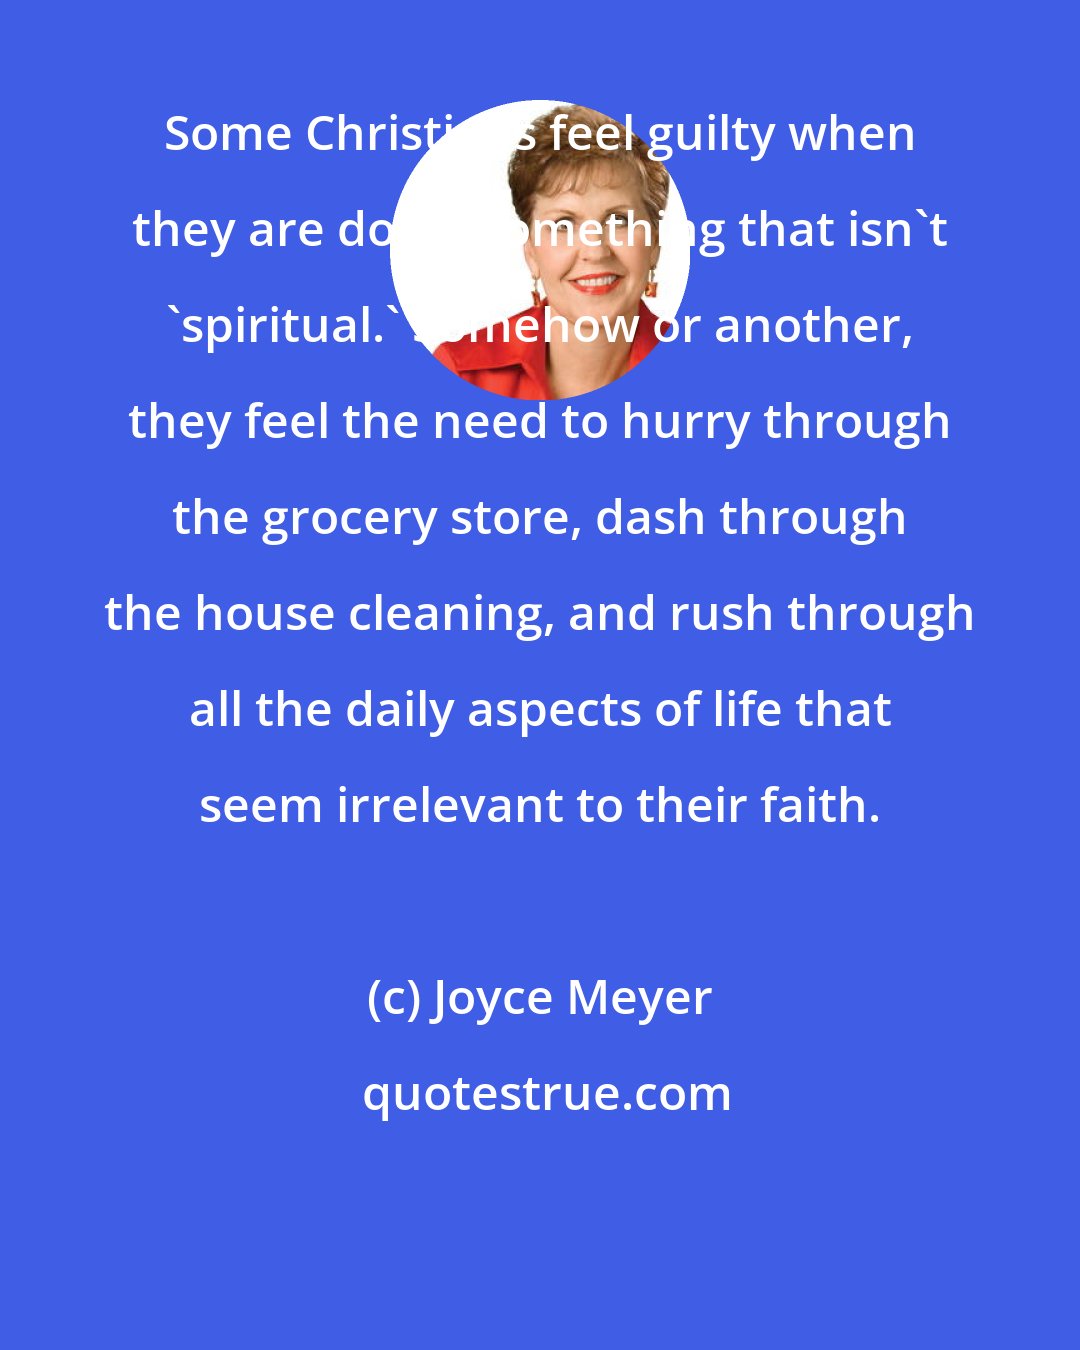 Joyce Meyer: Some Christians feel guilty when they are doing something that isn't 'spiritual.' Somehow or another, they feel the need to hurry through the grocery store, dash through the house cleaning, and rush through all the daily aspects of life that seem irrelevant to their faith.